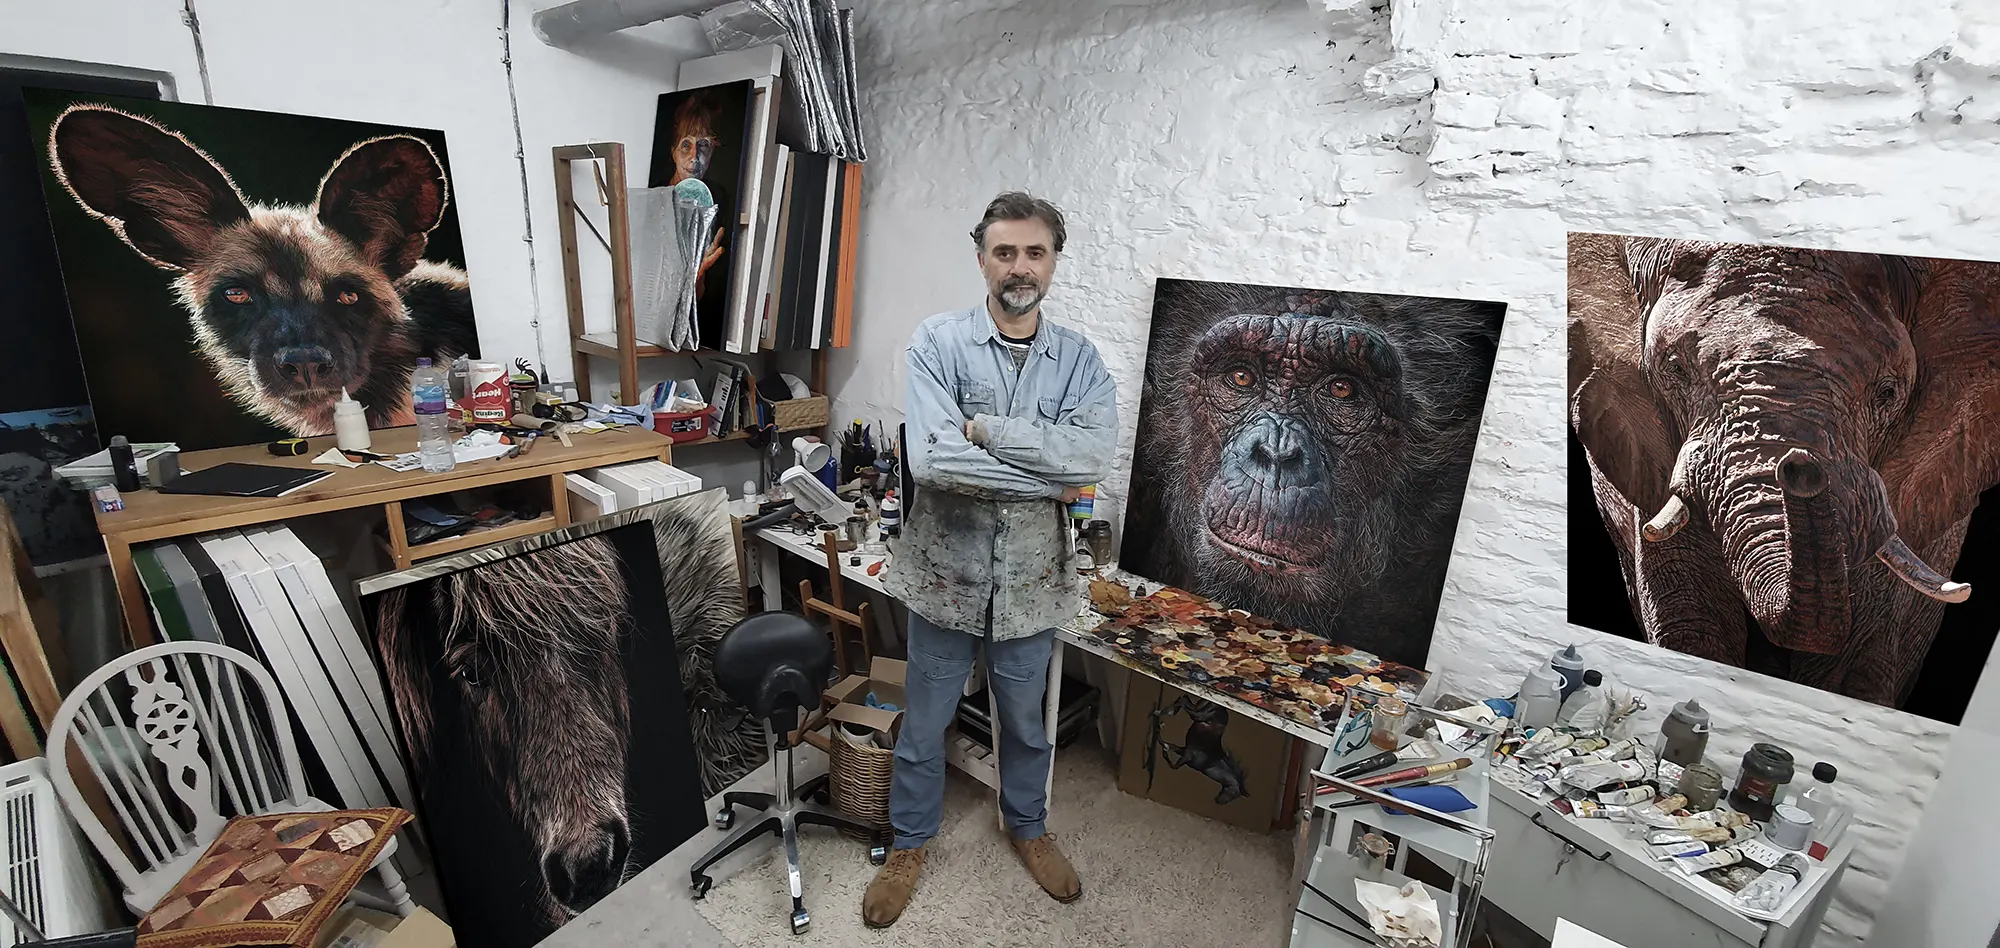 Steve Nayar in his busy painting studio surrounded by finished canvases and tools of the trade